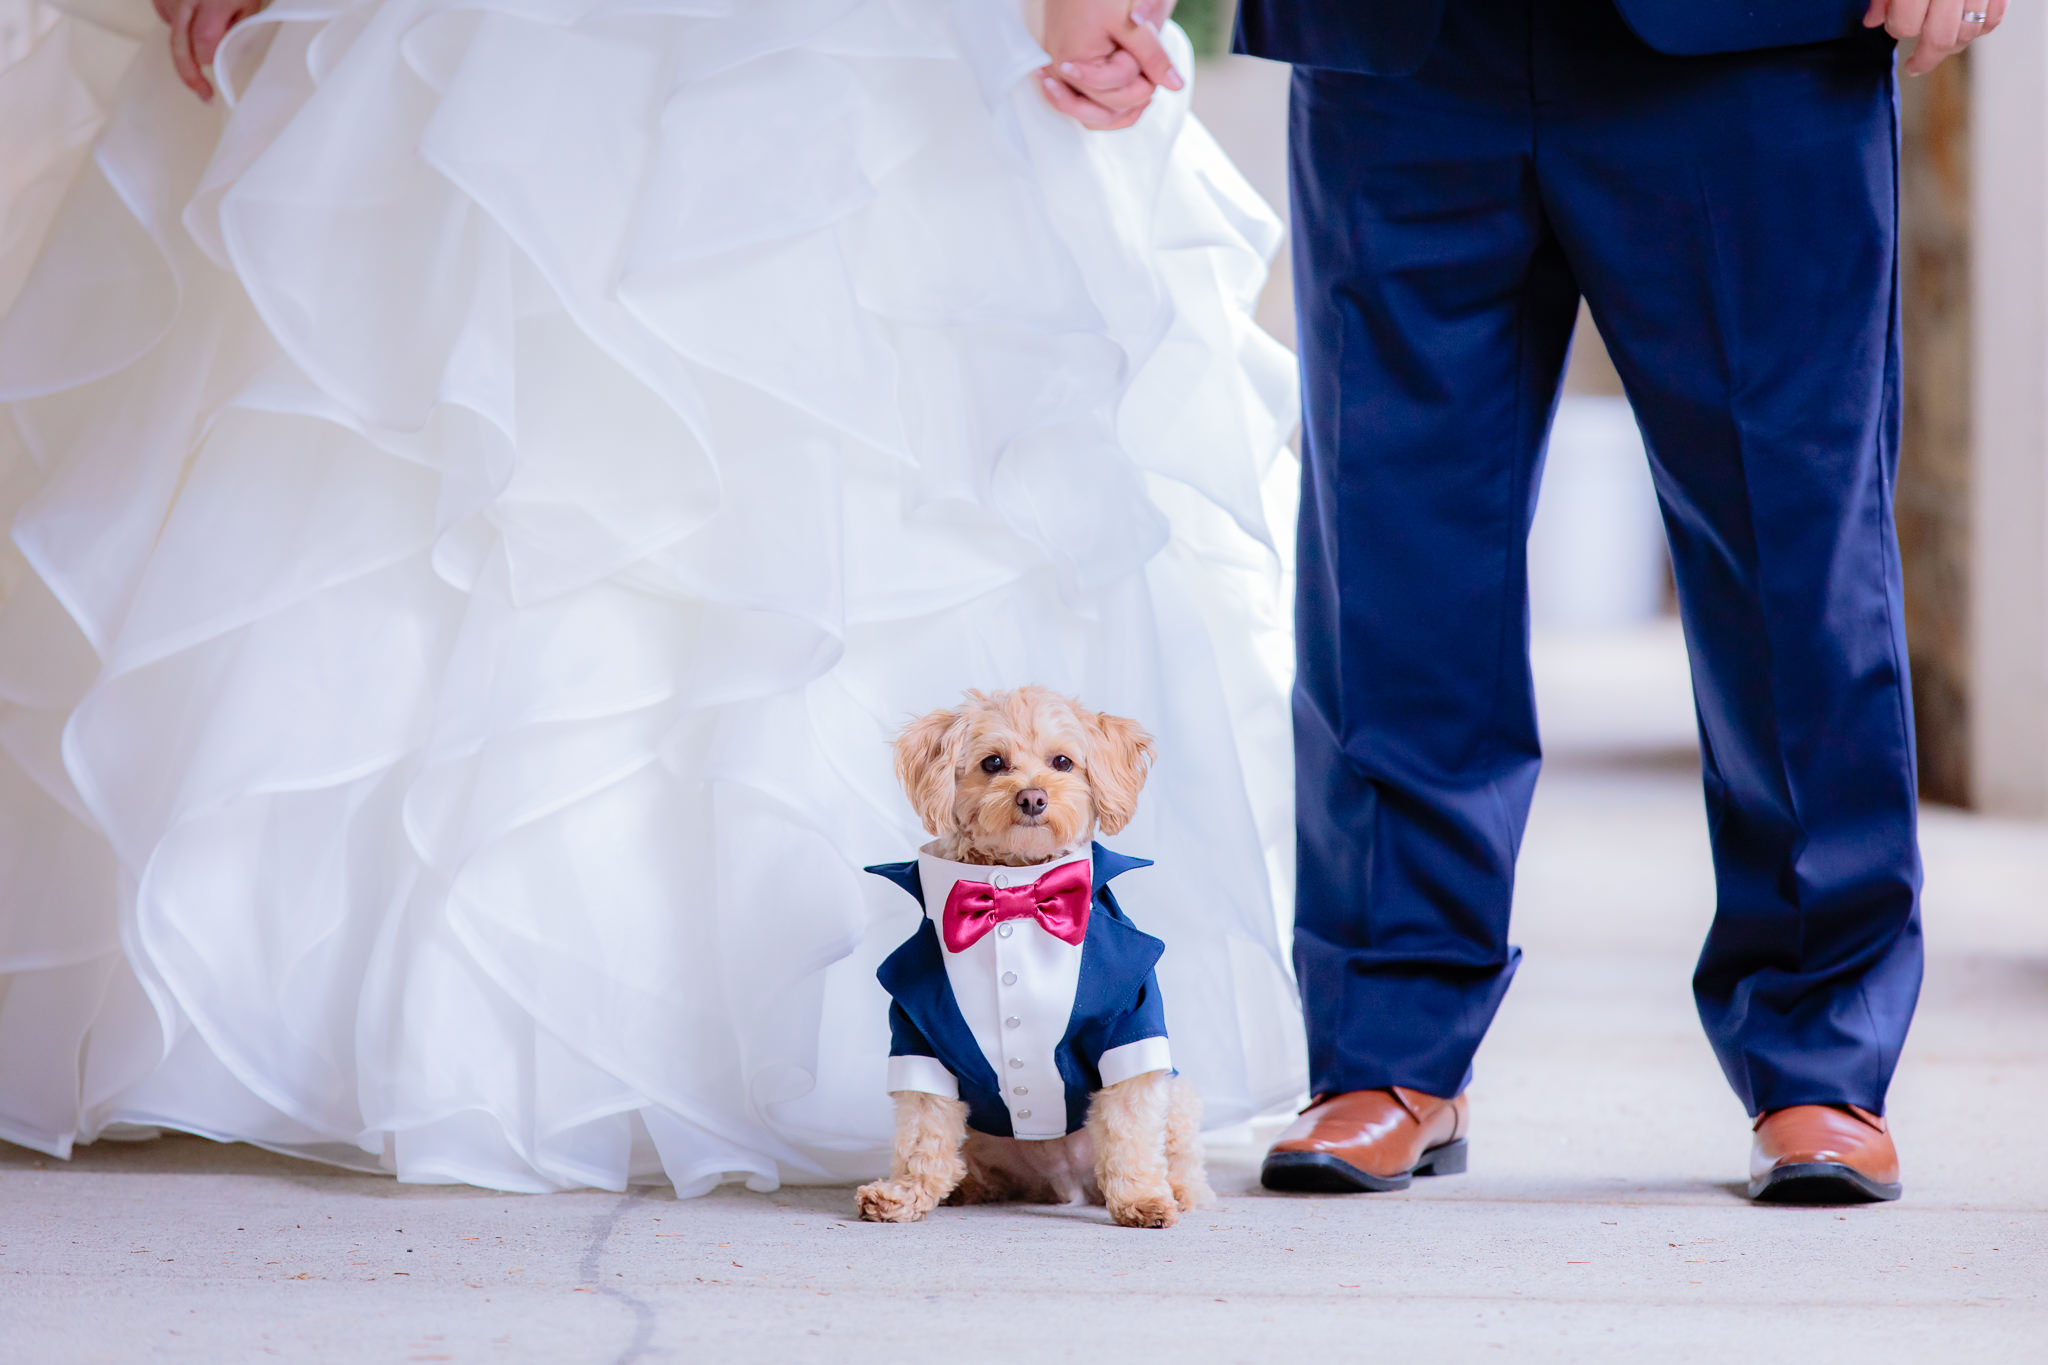 The bride and groom and their puppy all dressed up for the wedding at Mt. Lebanon United Methodist Church